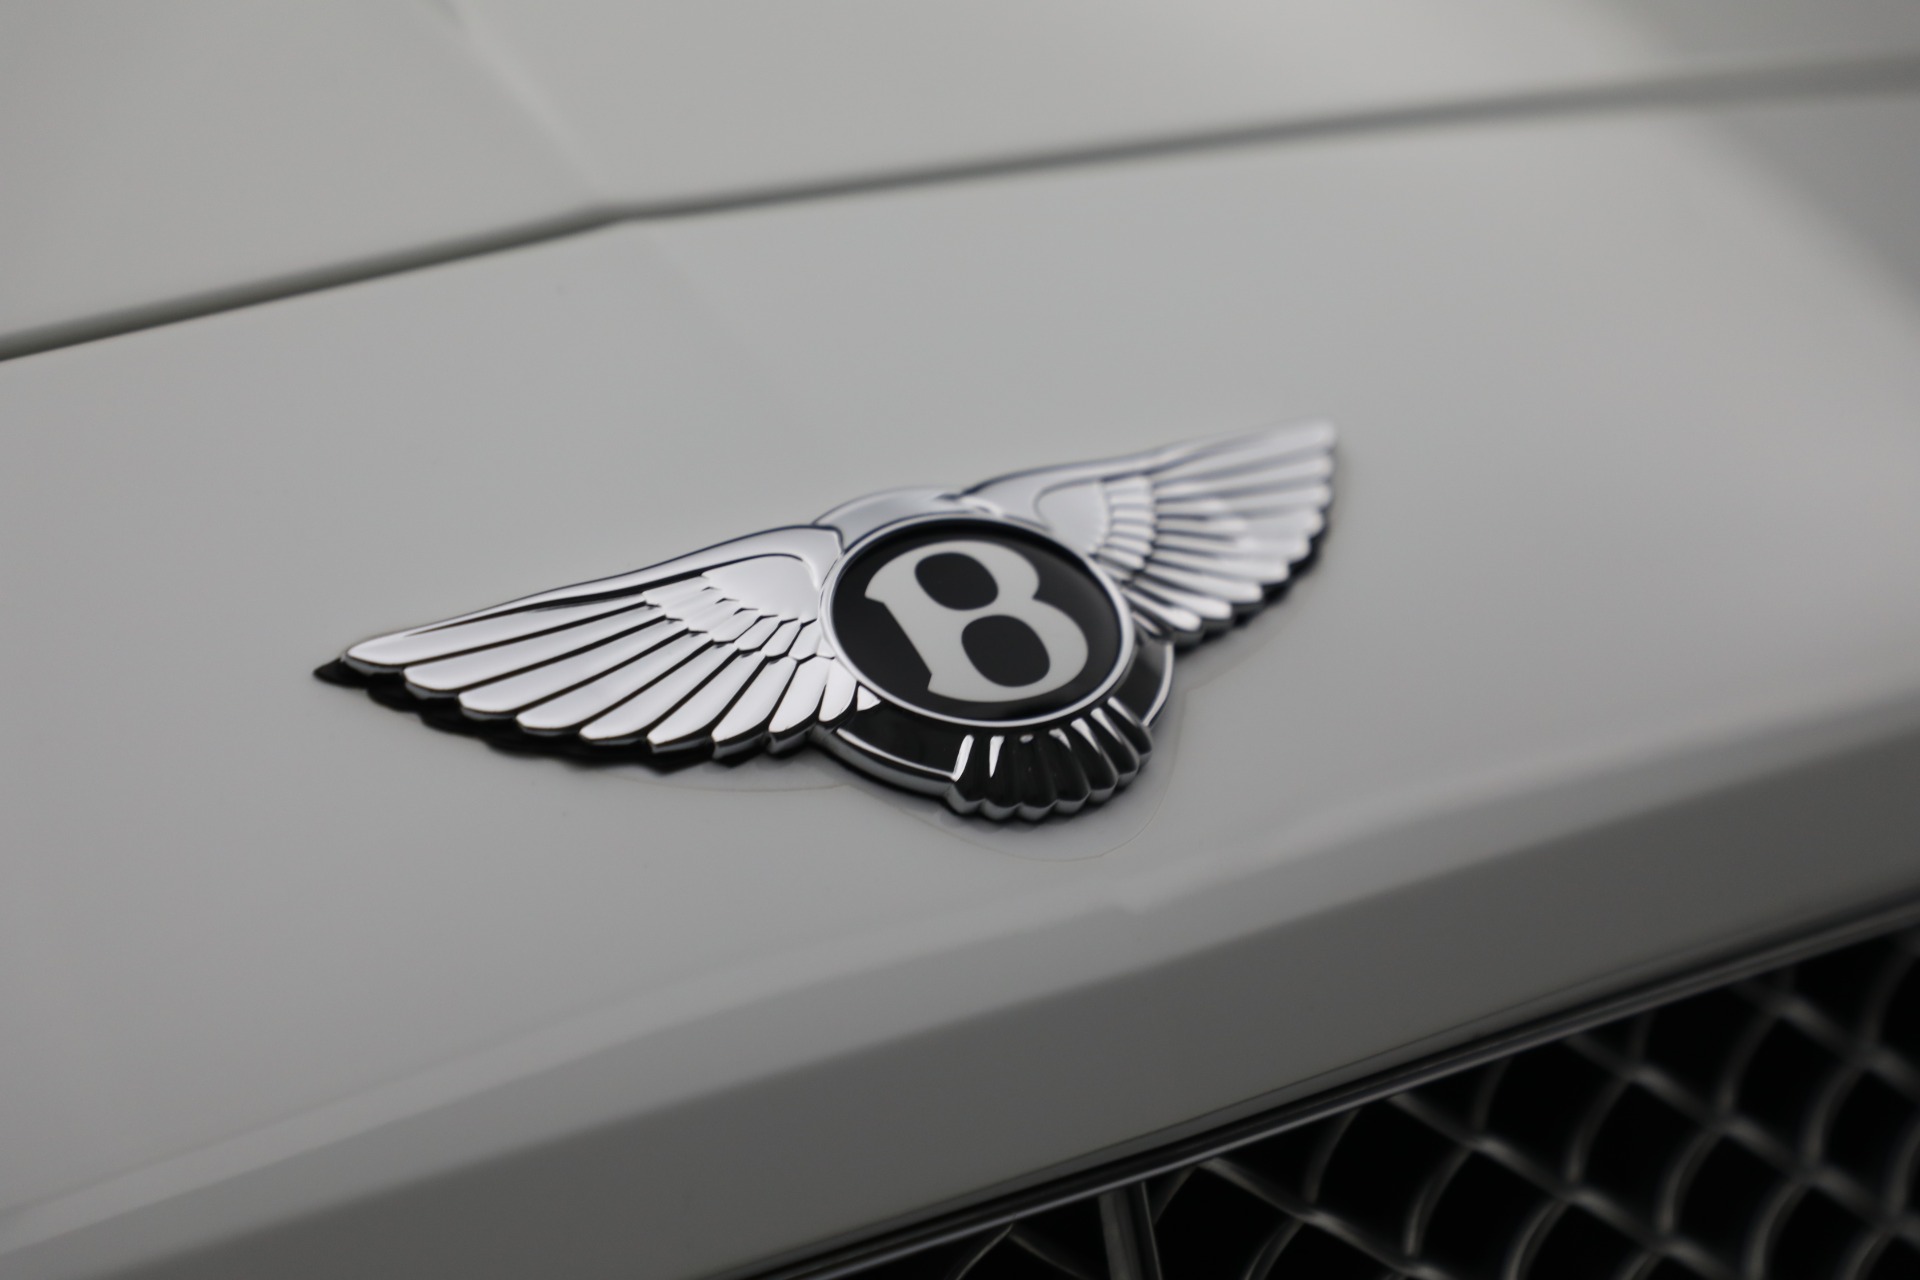 Used 2012 Bentley Continental GT W12